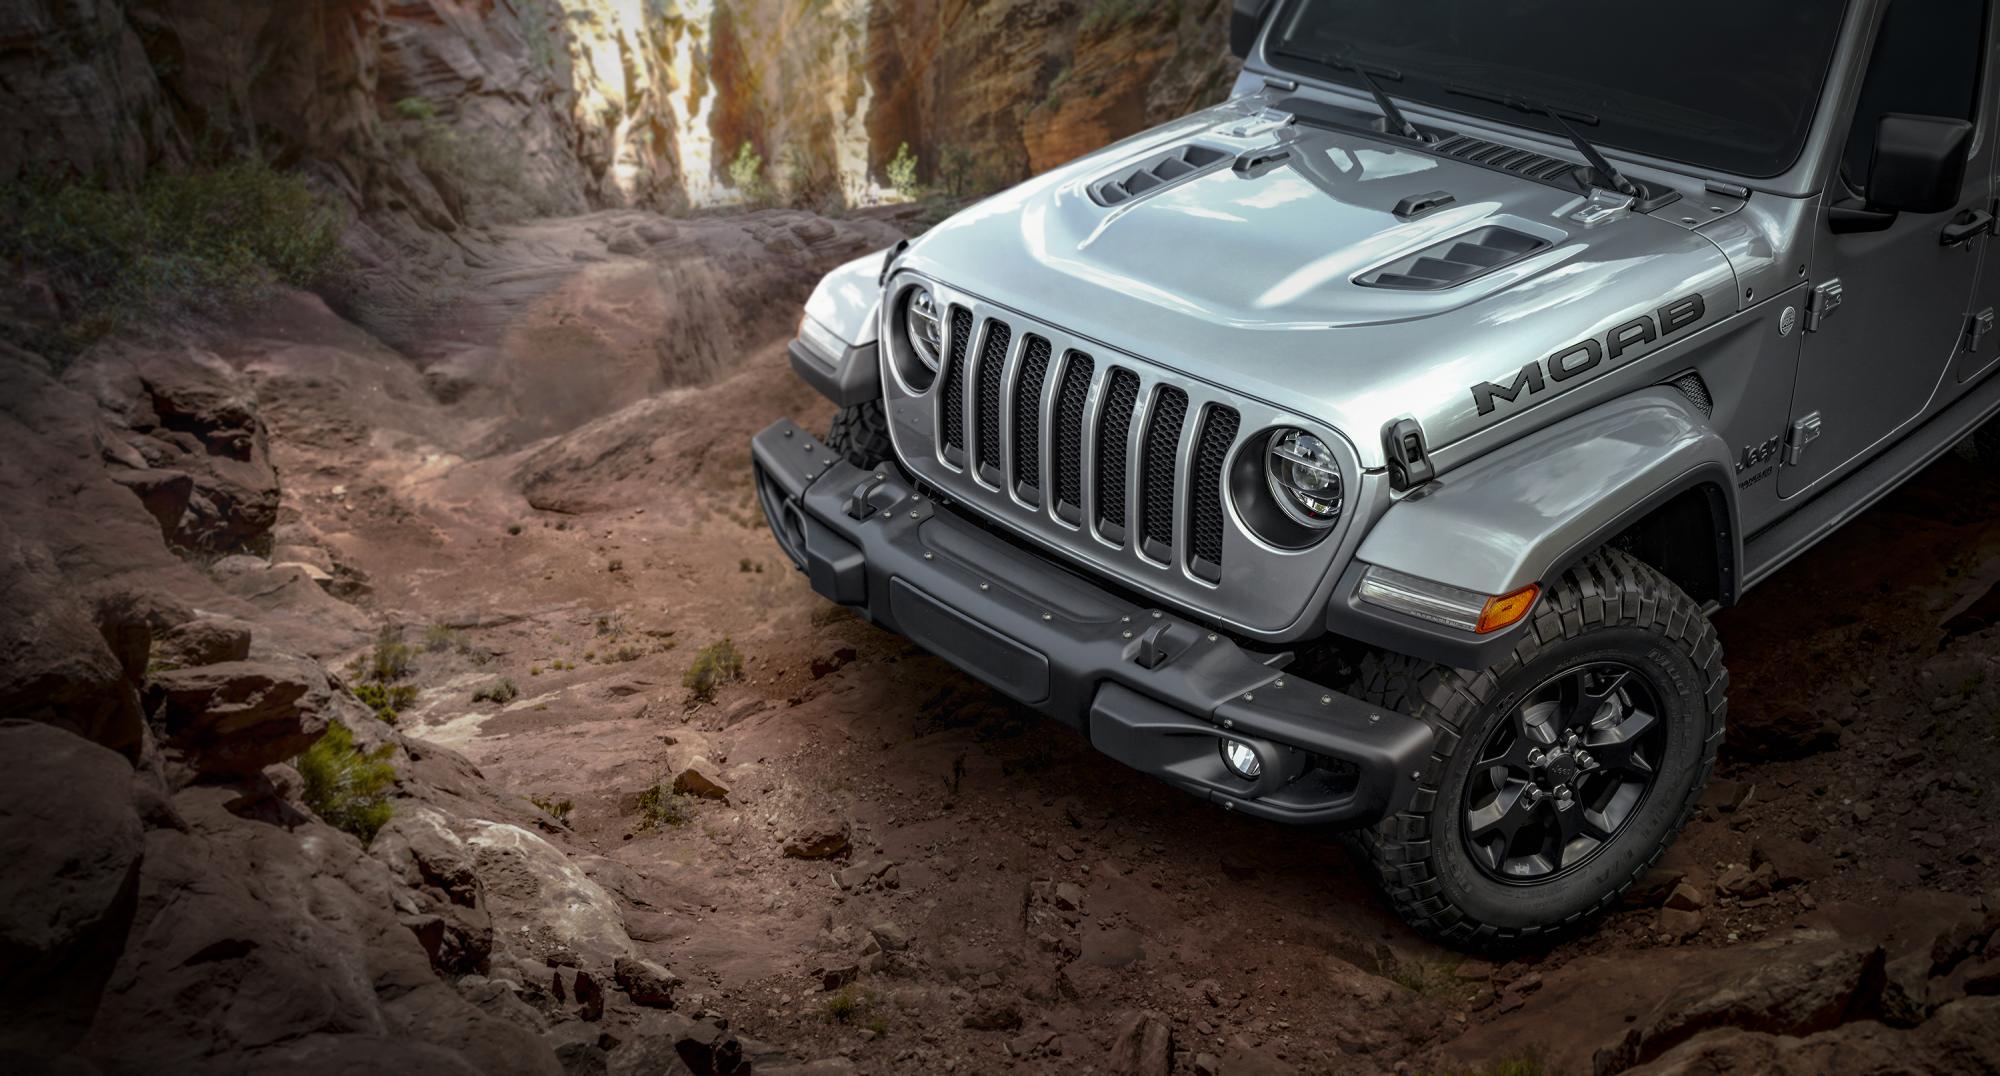 Jeep Wrangler JL to be available in India in Moab Edition as well - Report